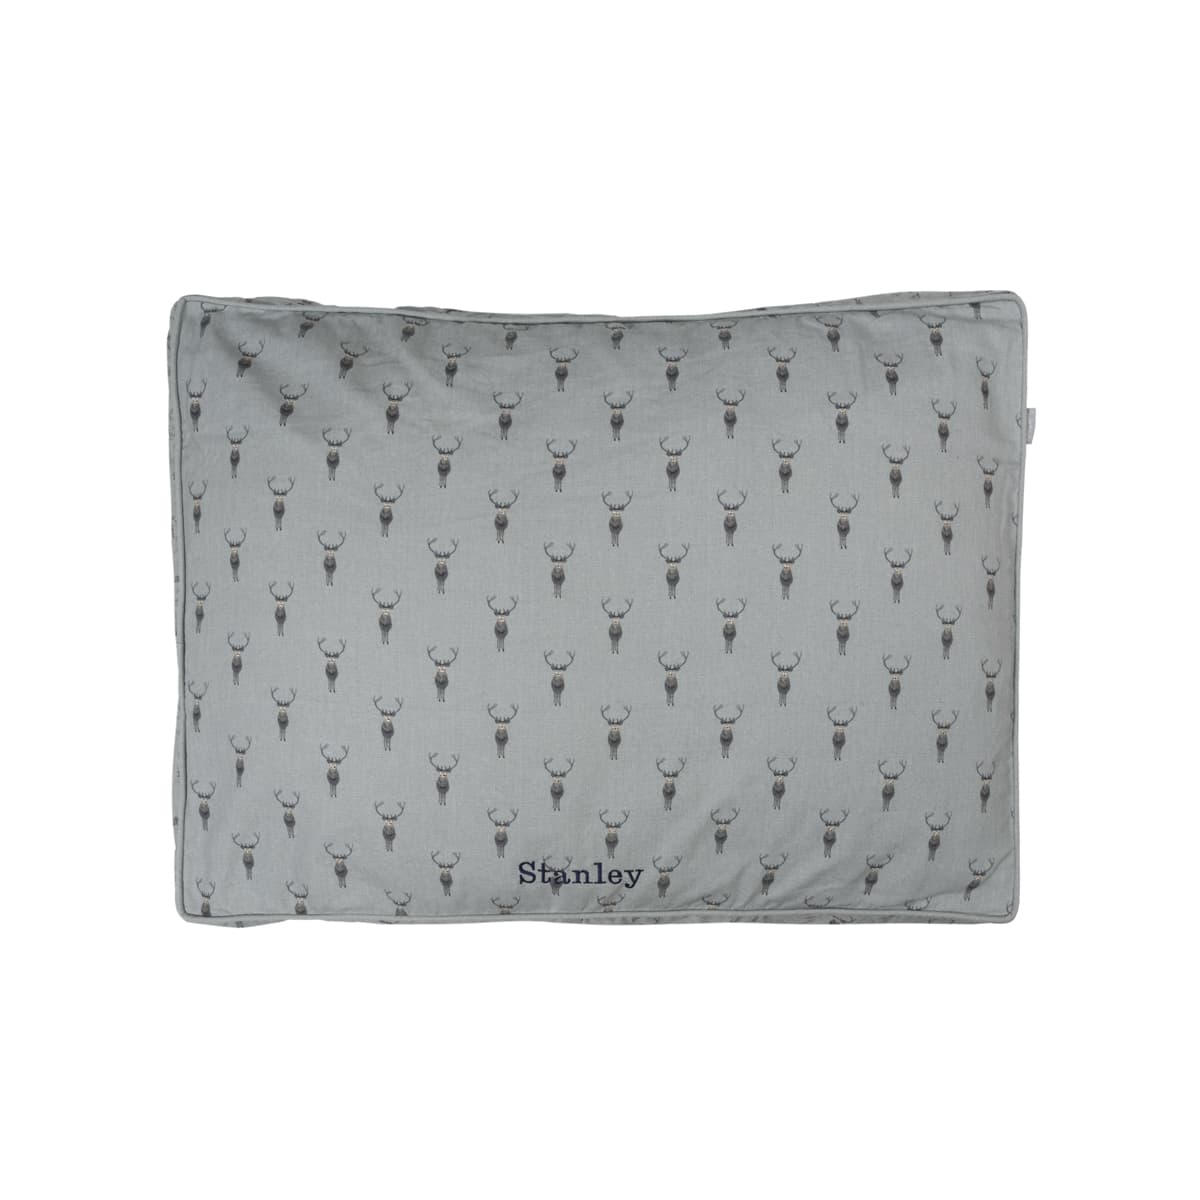 Highland stag pet mattress cover by Sophie Allport